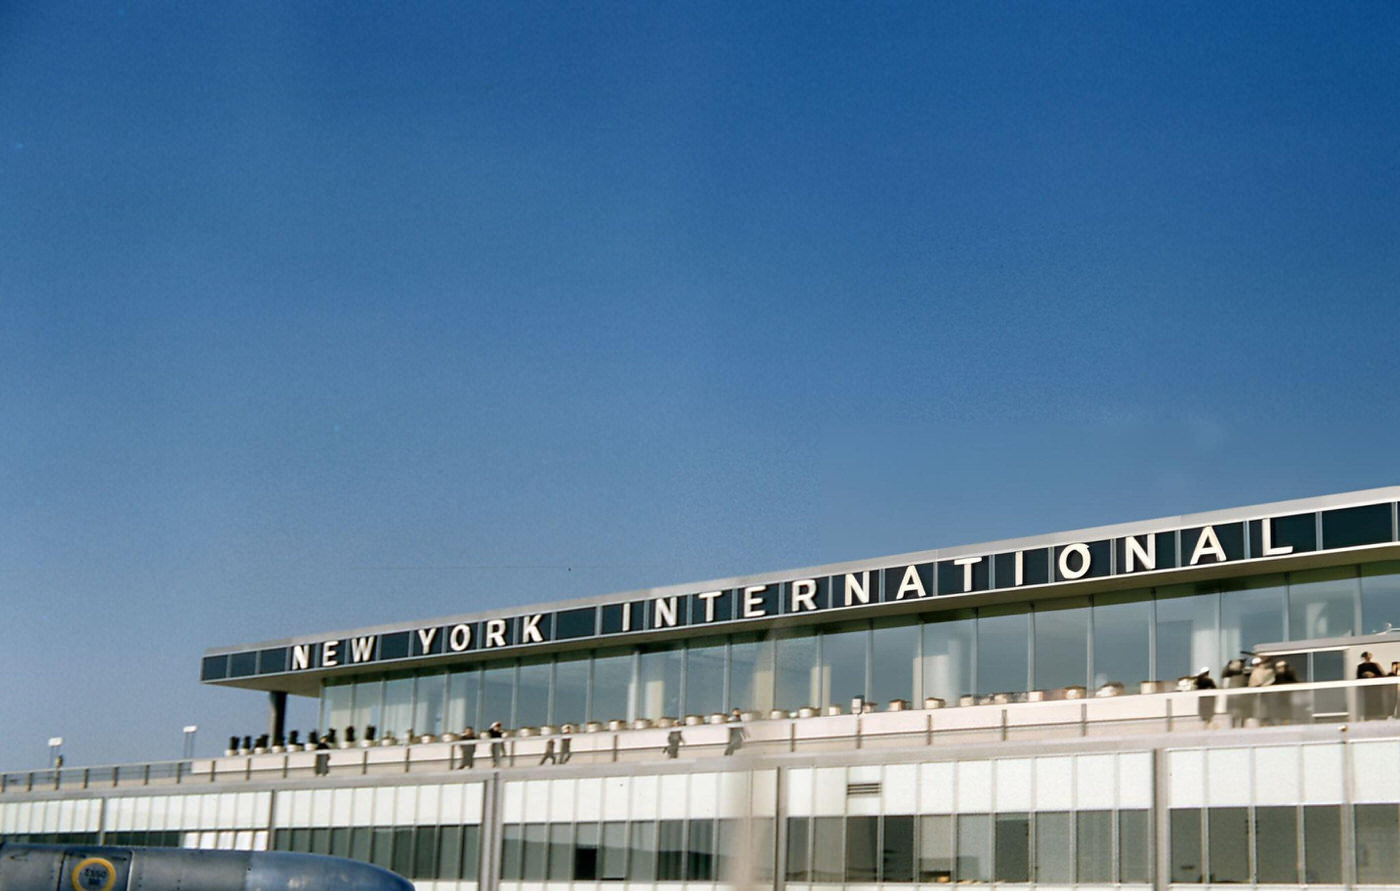 View Of The International Arrivals Terminal Of The New York International Airport, In Jamaica, Queens, New York City, 1959.